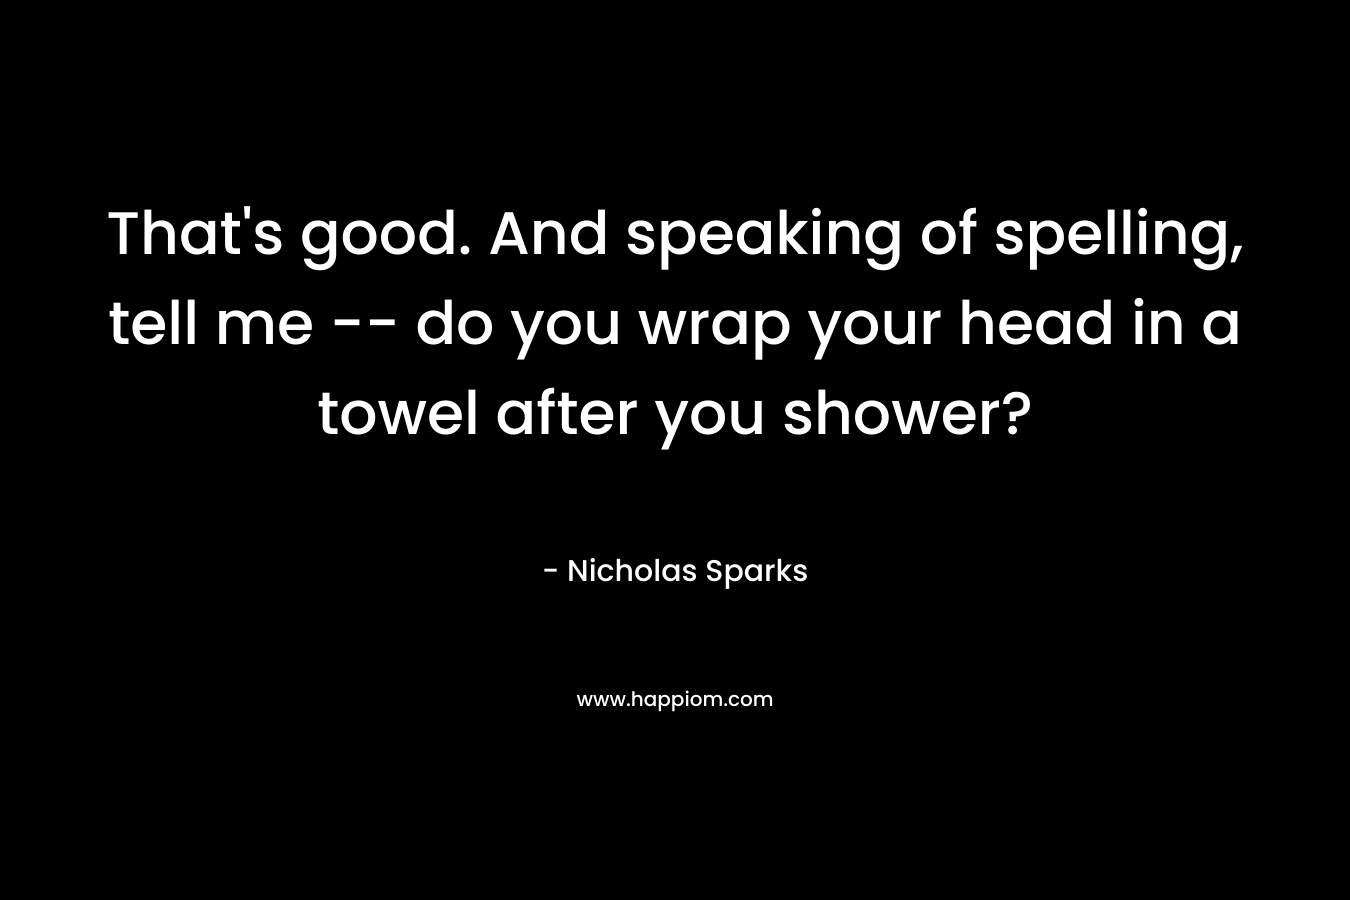 That’s good. And speaking of spelling, tell me — do you wrap your head in a towel after you shower? – Nicholas Sparks